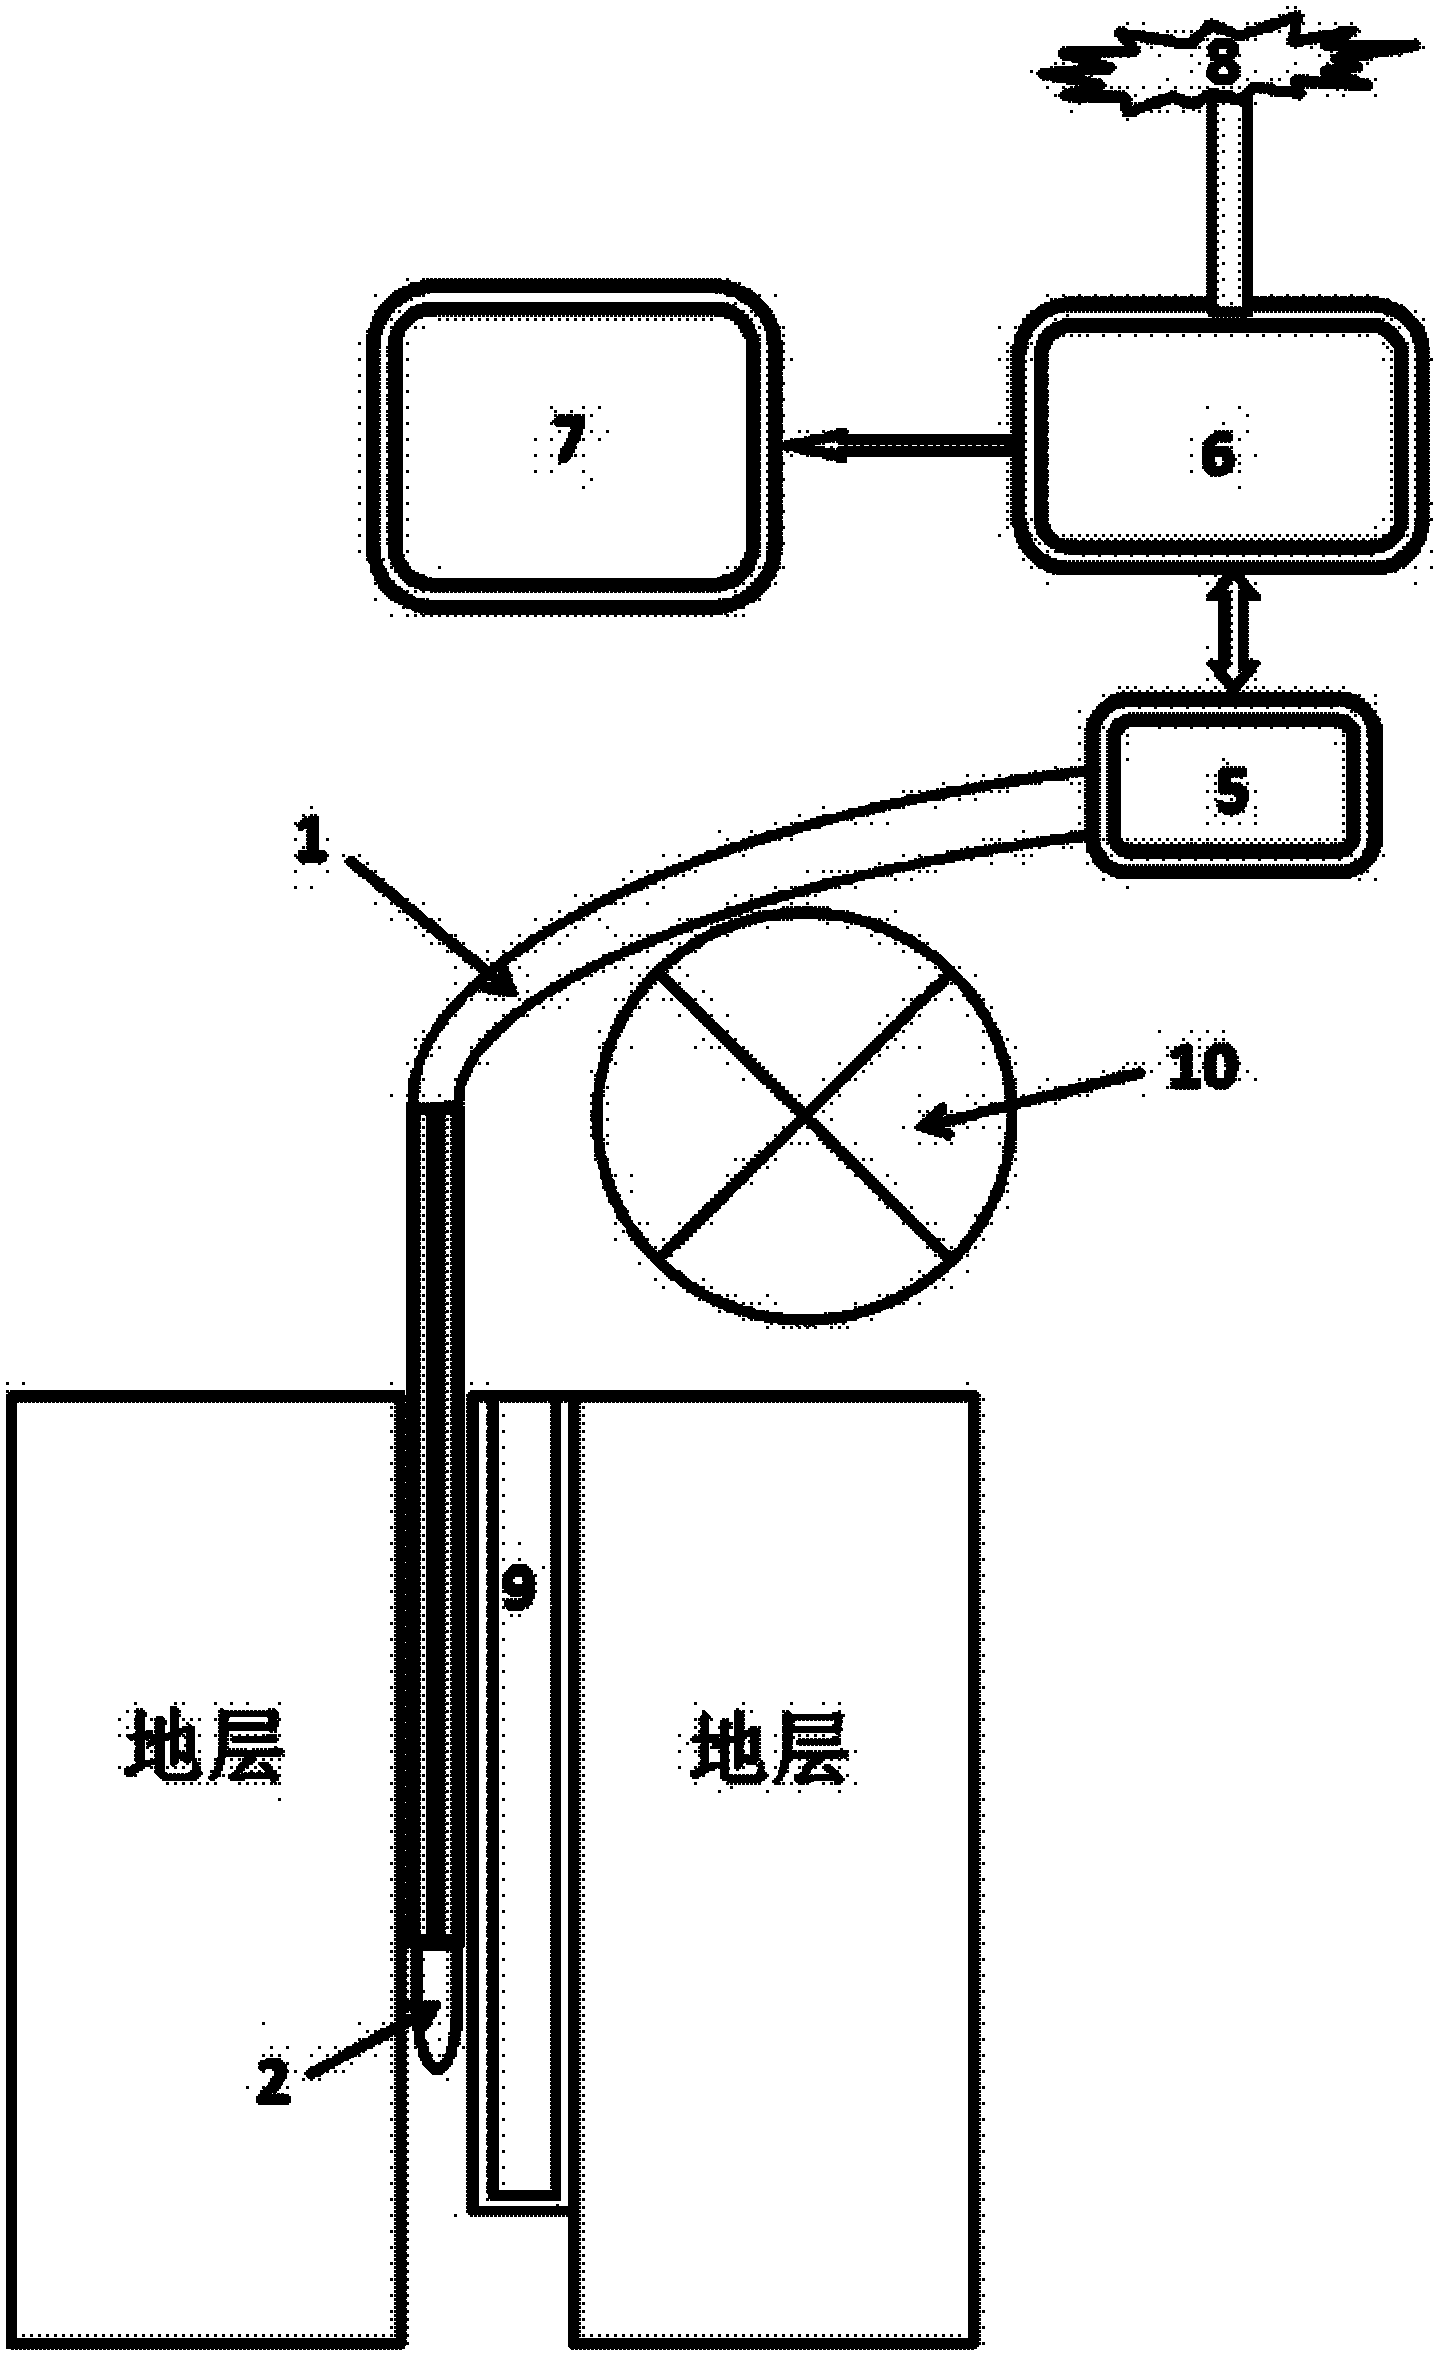 System for continuously monitoring temperature and pressure during steam injection and soaking process